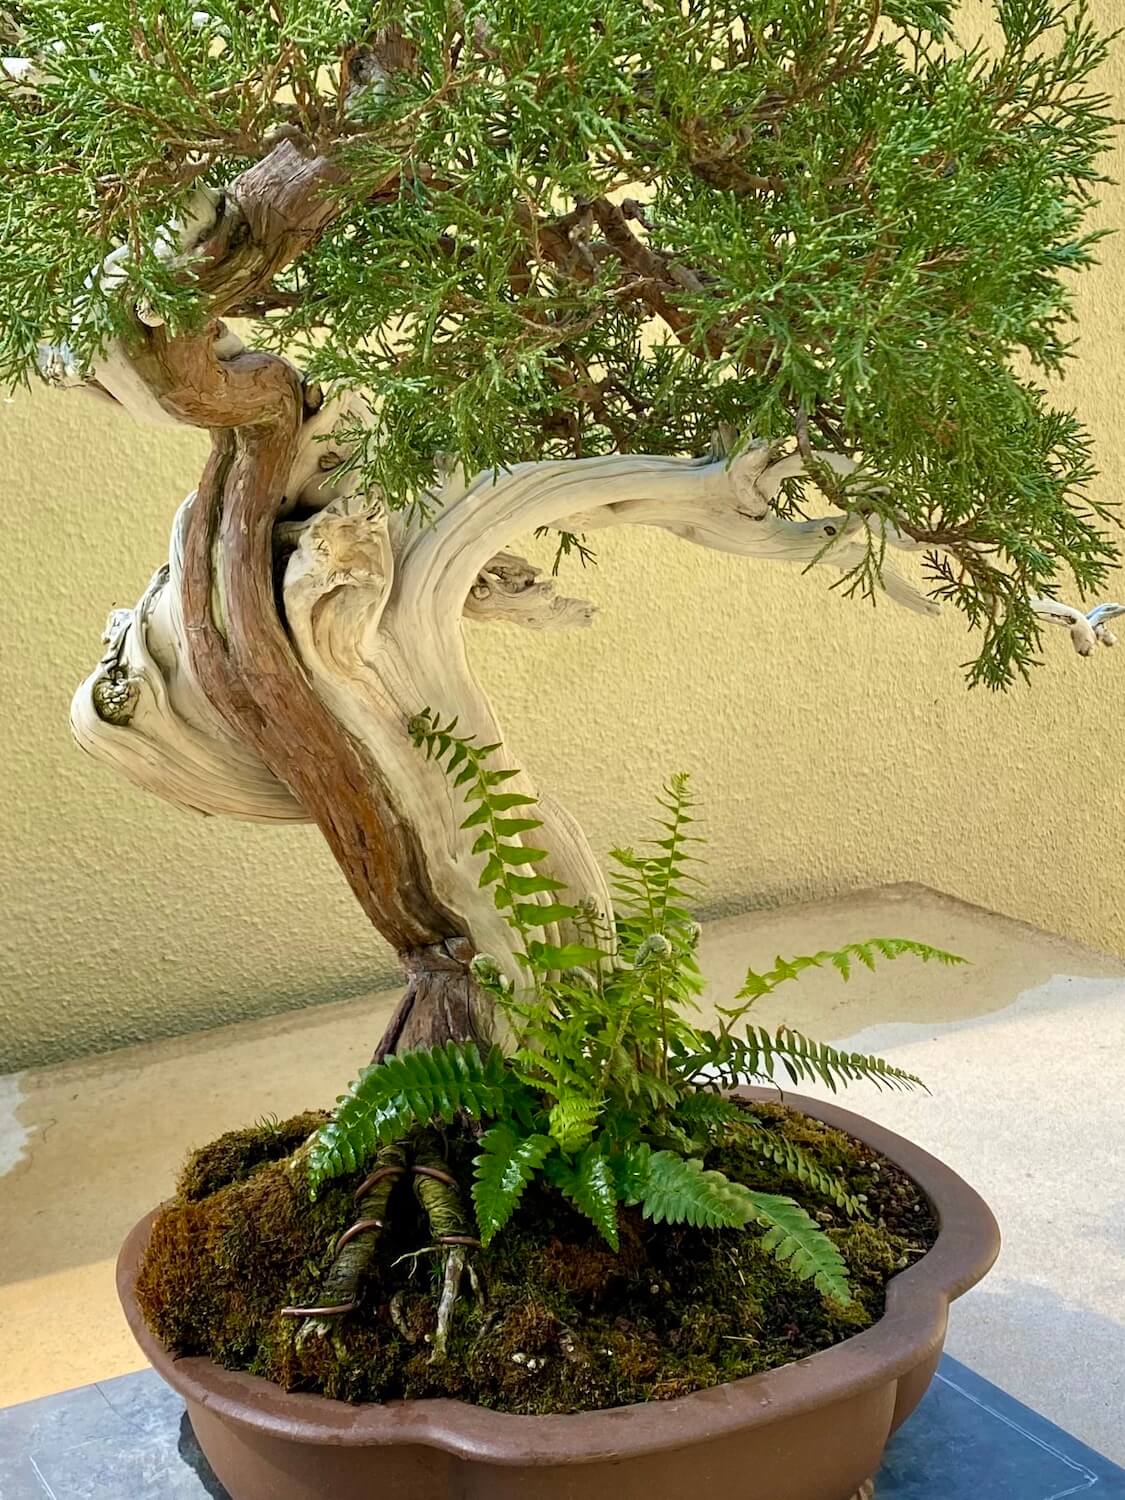 This miniature tree appears to have two intertwining types of trees, one with white bark and the other with a cedar looking skin while the cedar leaves fan out in all directions. Below a miniature version of a fern spreads fronds amongst a moss covered base. 